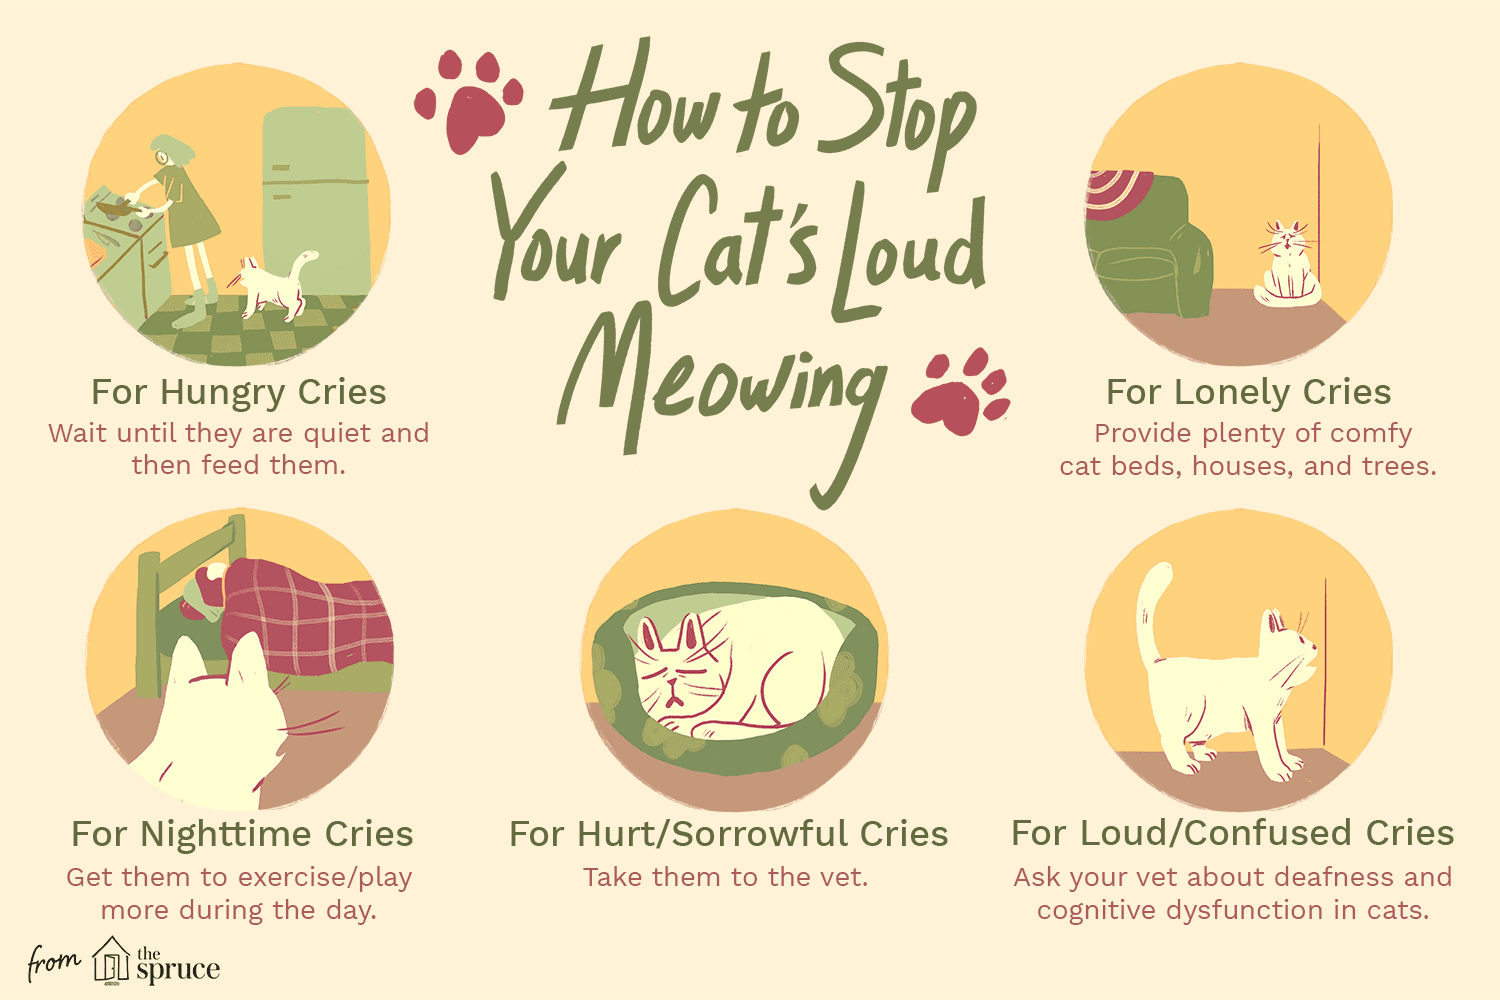 An illustration of how to stop your cat's loud meowing